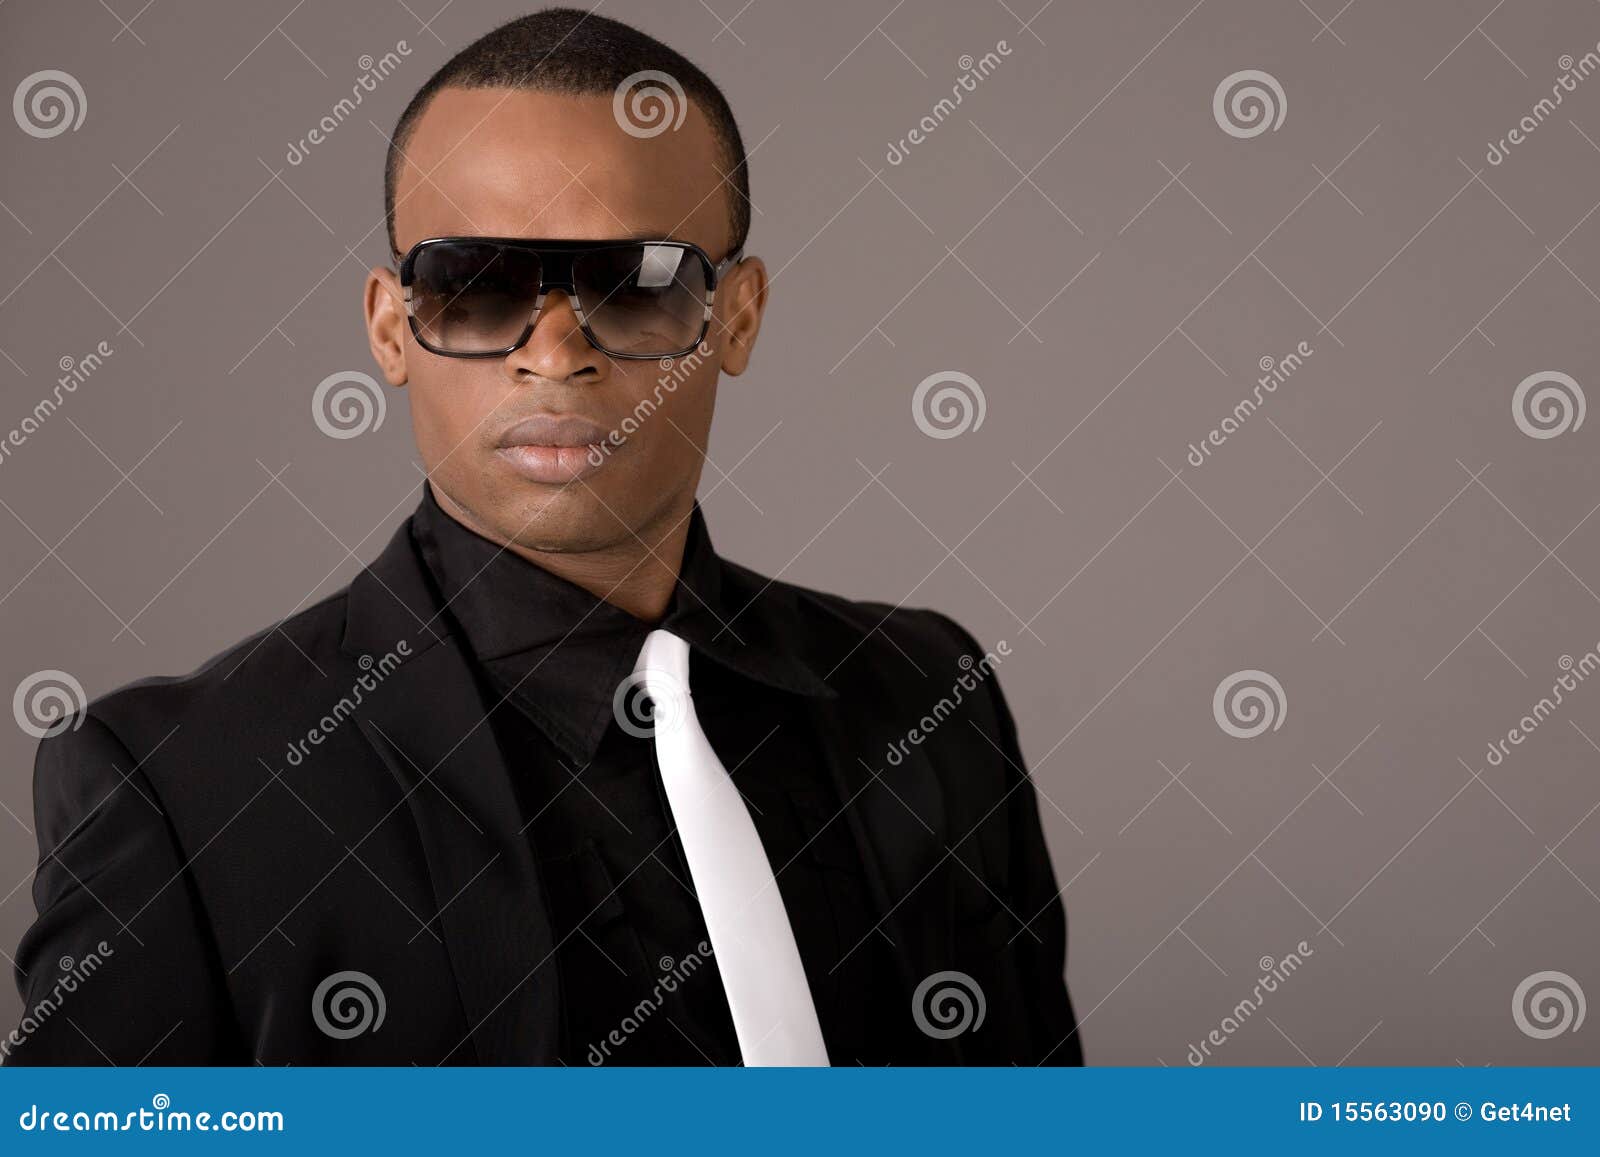 Ethnic Young Business Man Wearing Sunglasses Stock Photo - Image